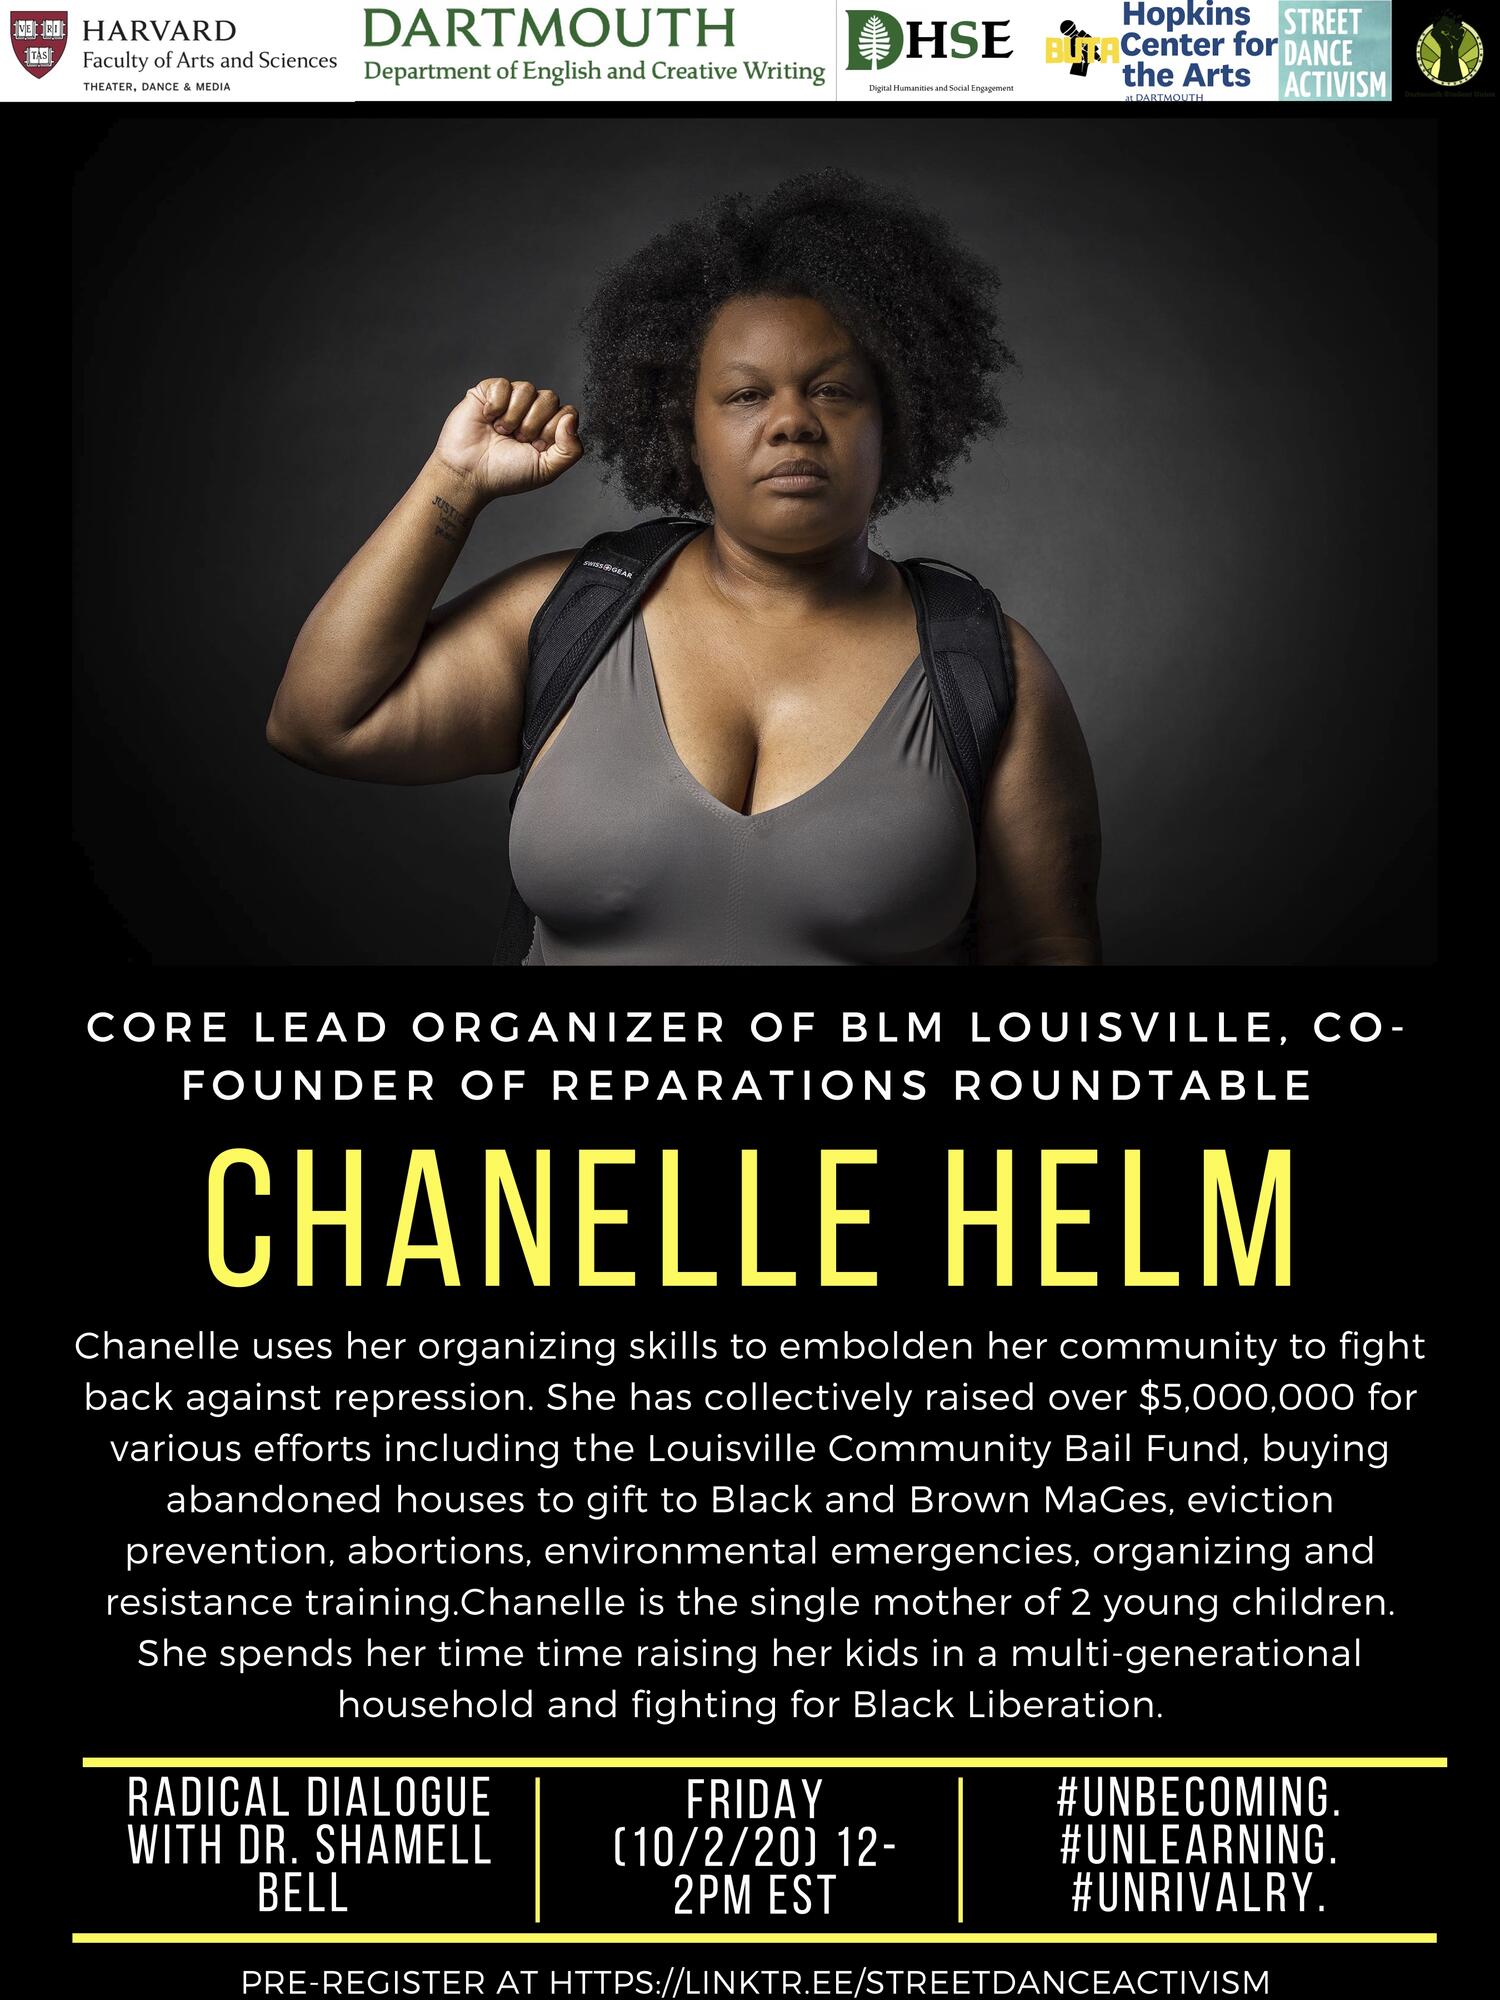 Chanelle Helm stares back at the camera while holding her fist in the air. Below is info about Chanelle Helm and the event.